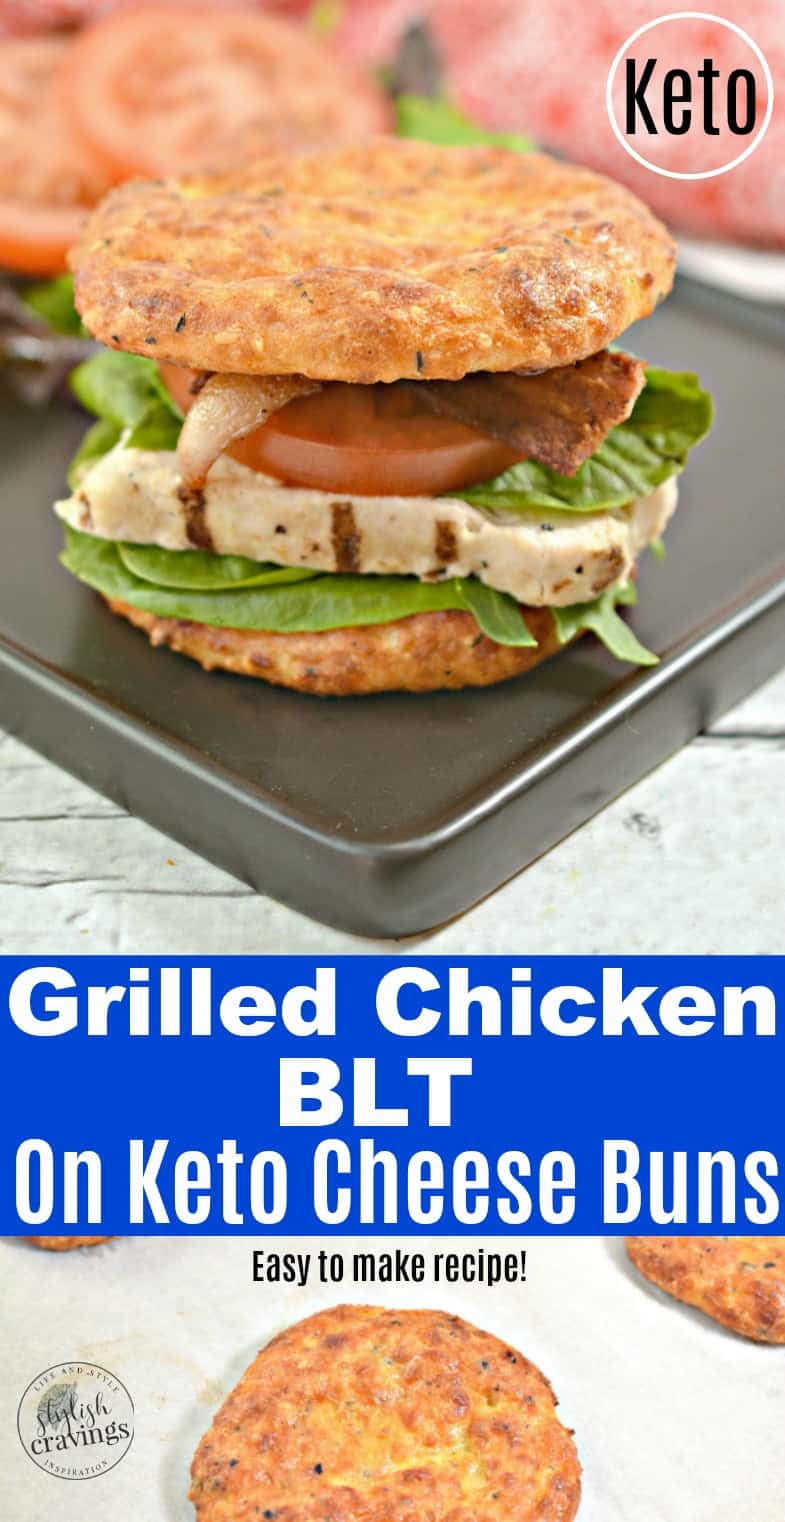 Grilled Chicken BLT On Keto Cheese Buns